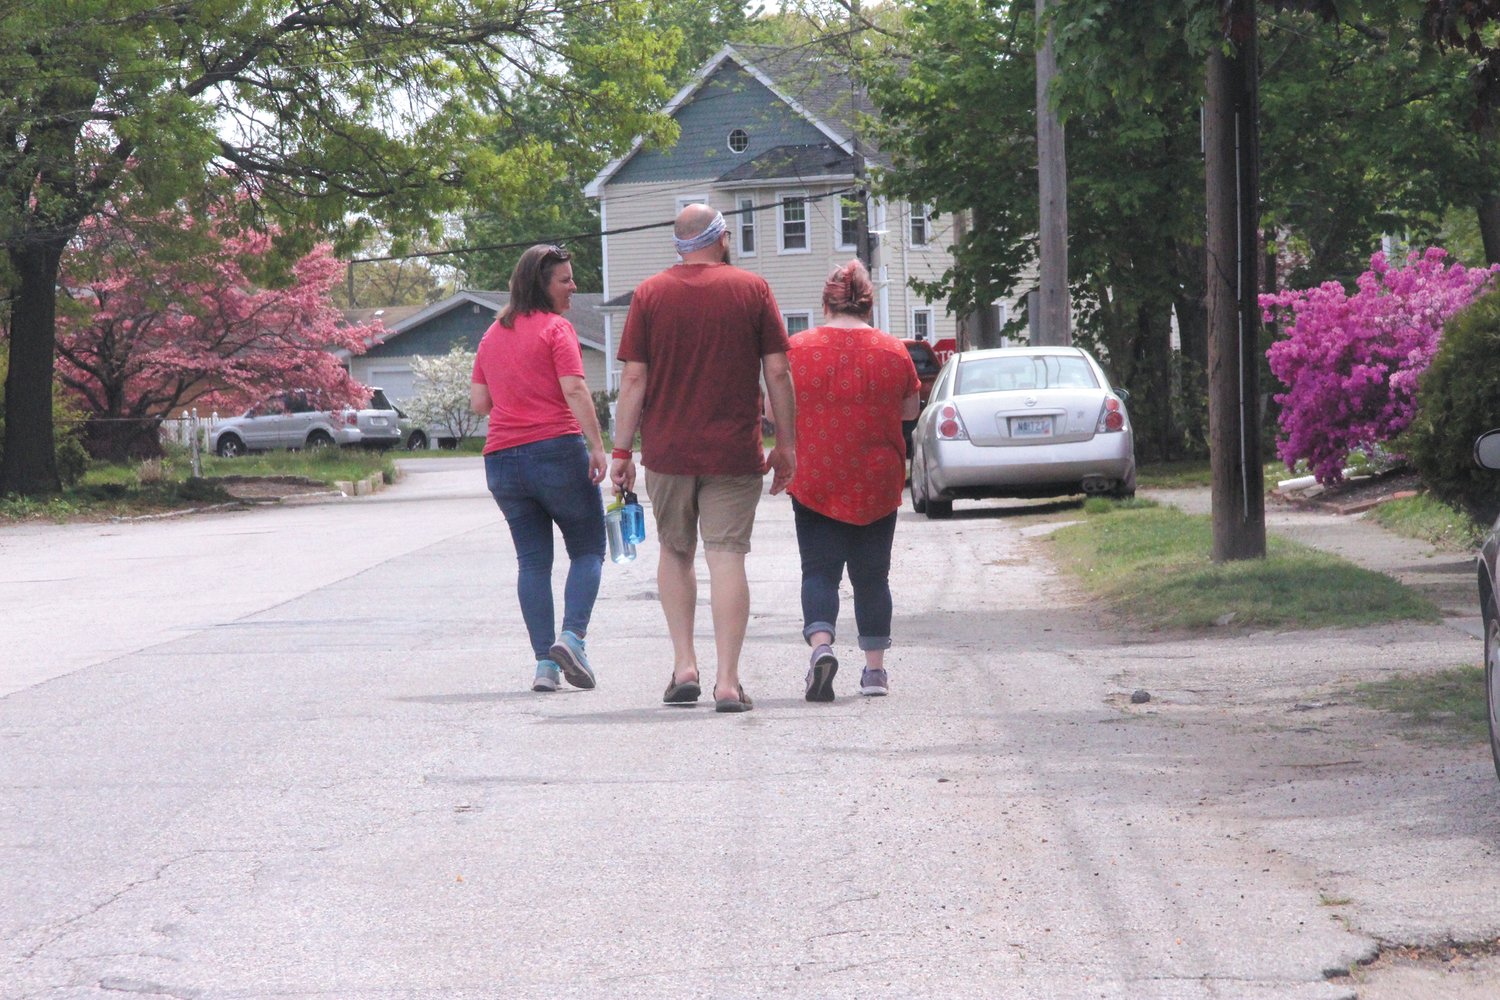 HOUSE BY HOUSE:  Candidate Fox gets a tour of Norwood from Ryan and Katie Hall.